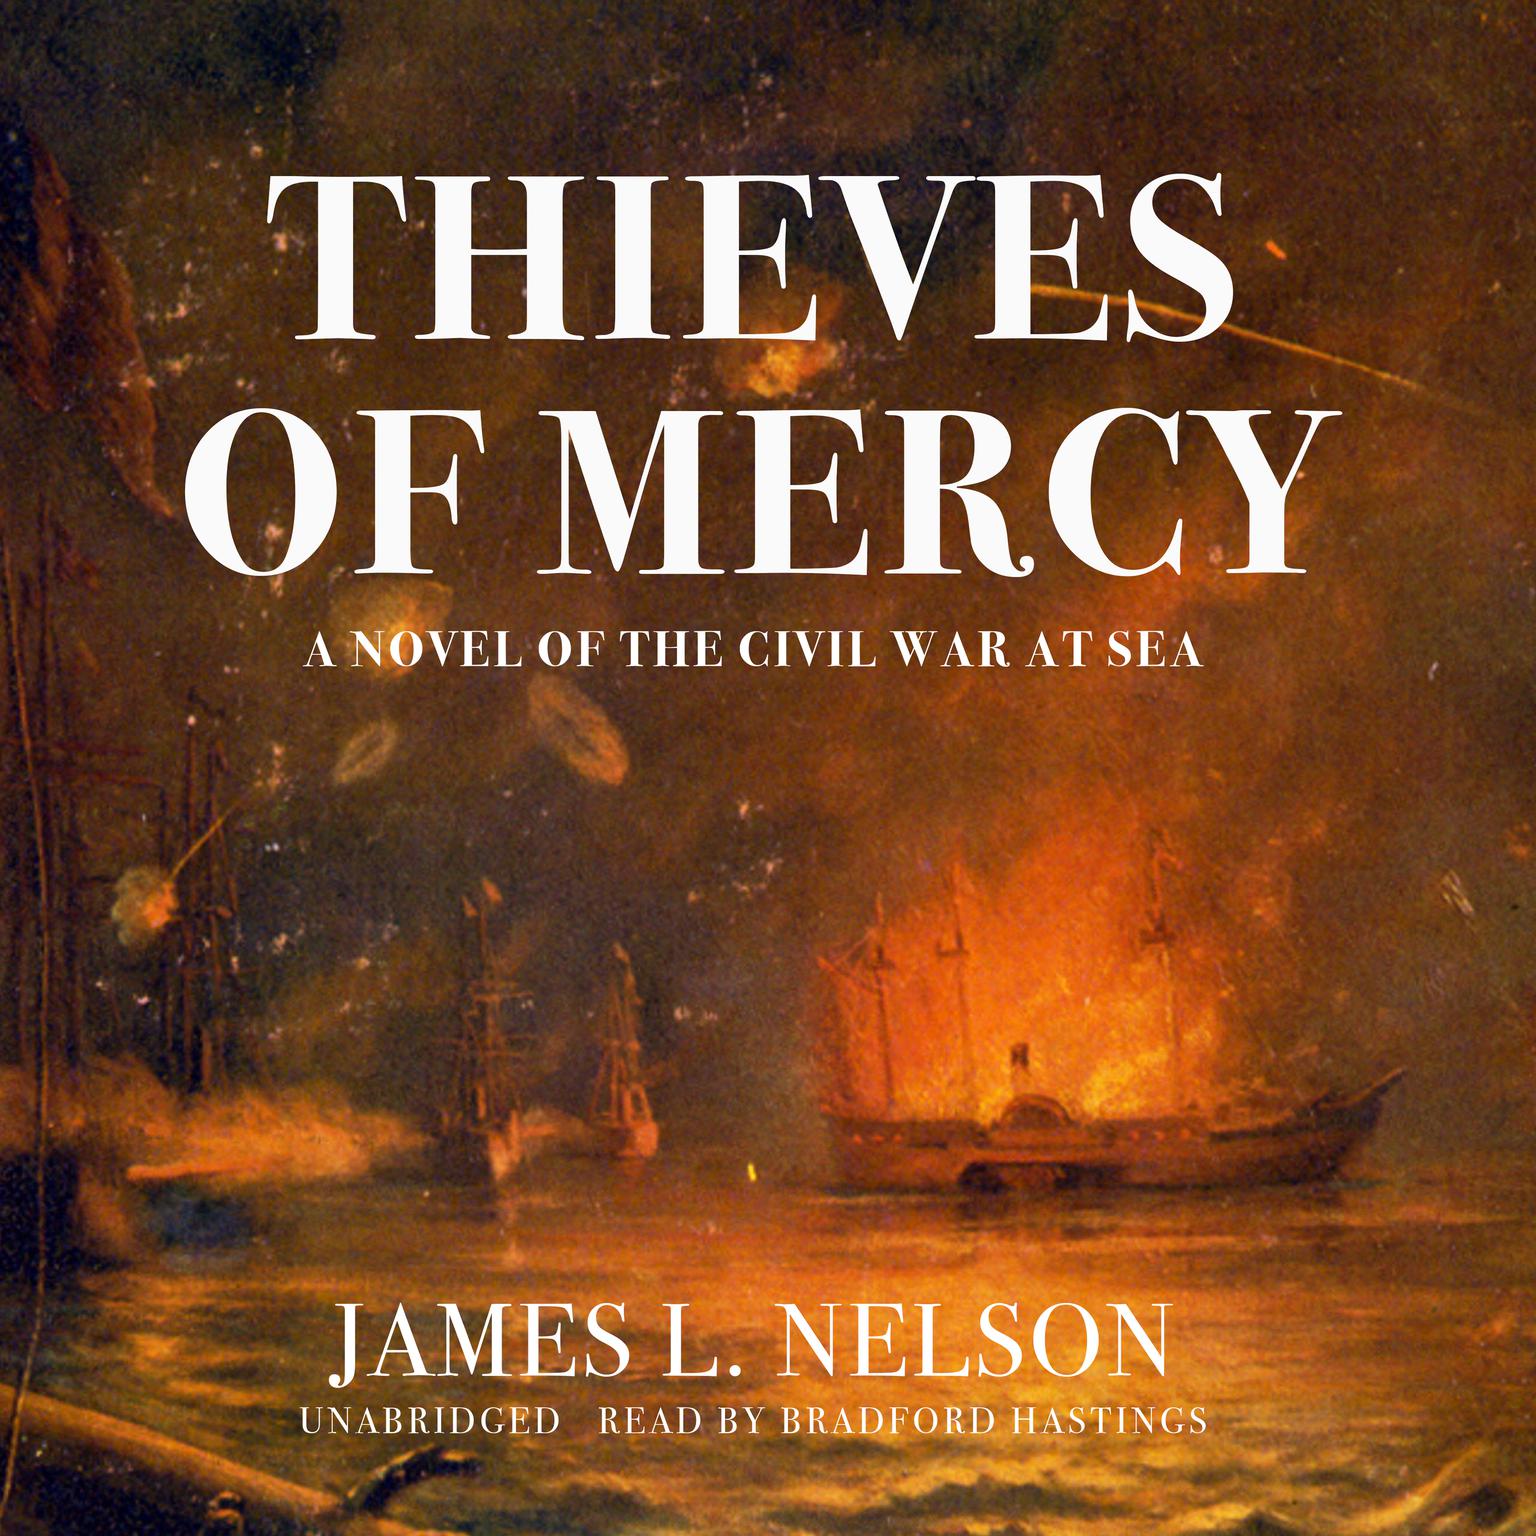 Thieves of Mercy: A Novel of the Civil War at Sea Audiobook, by James L. Nelson